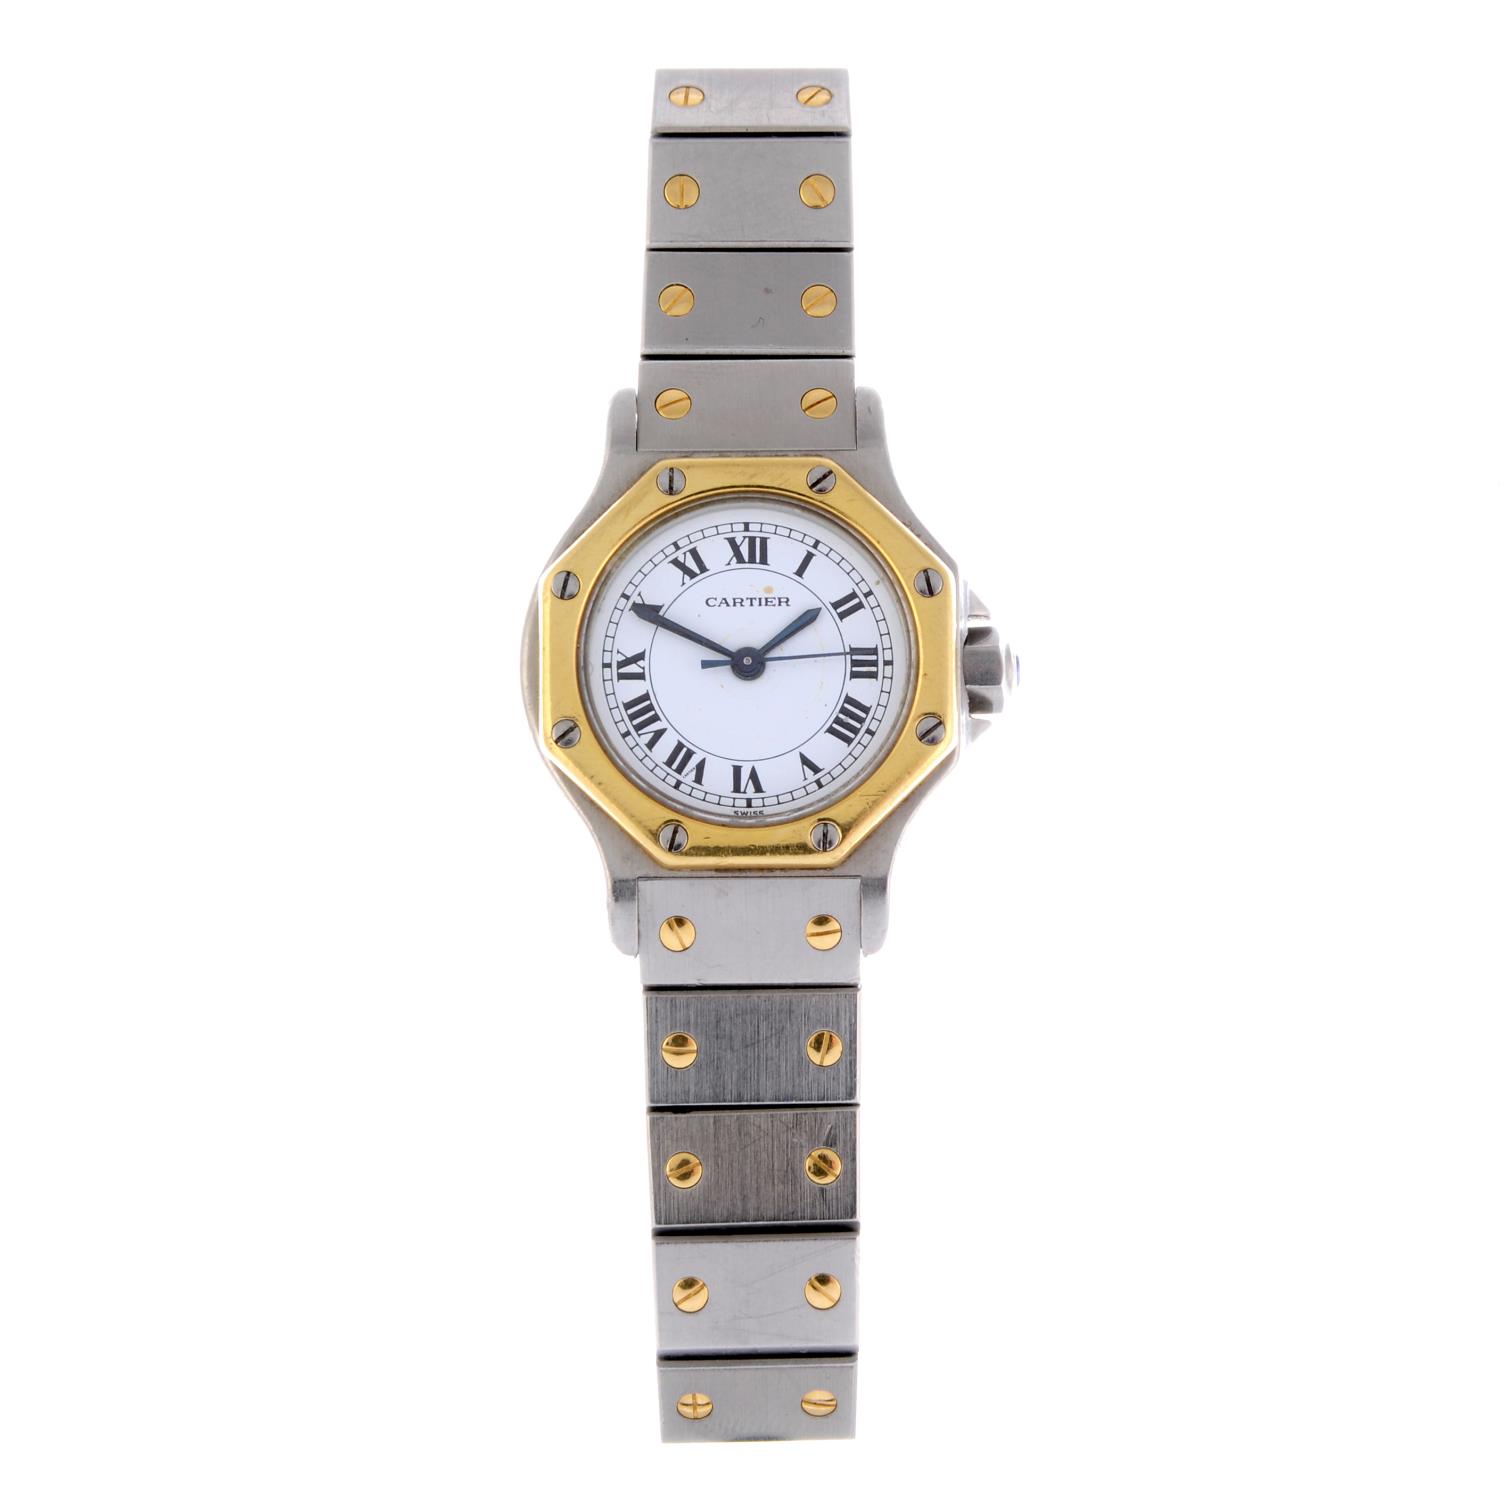 CARTIER - a lady's Santos Ronde bracelet watch. Stainless steel case with yellow metal bezel.